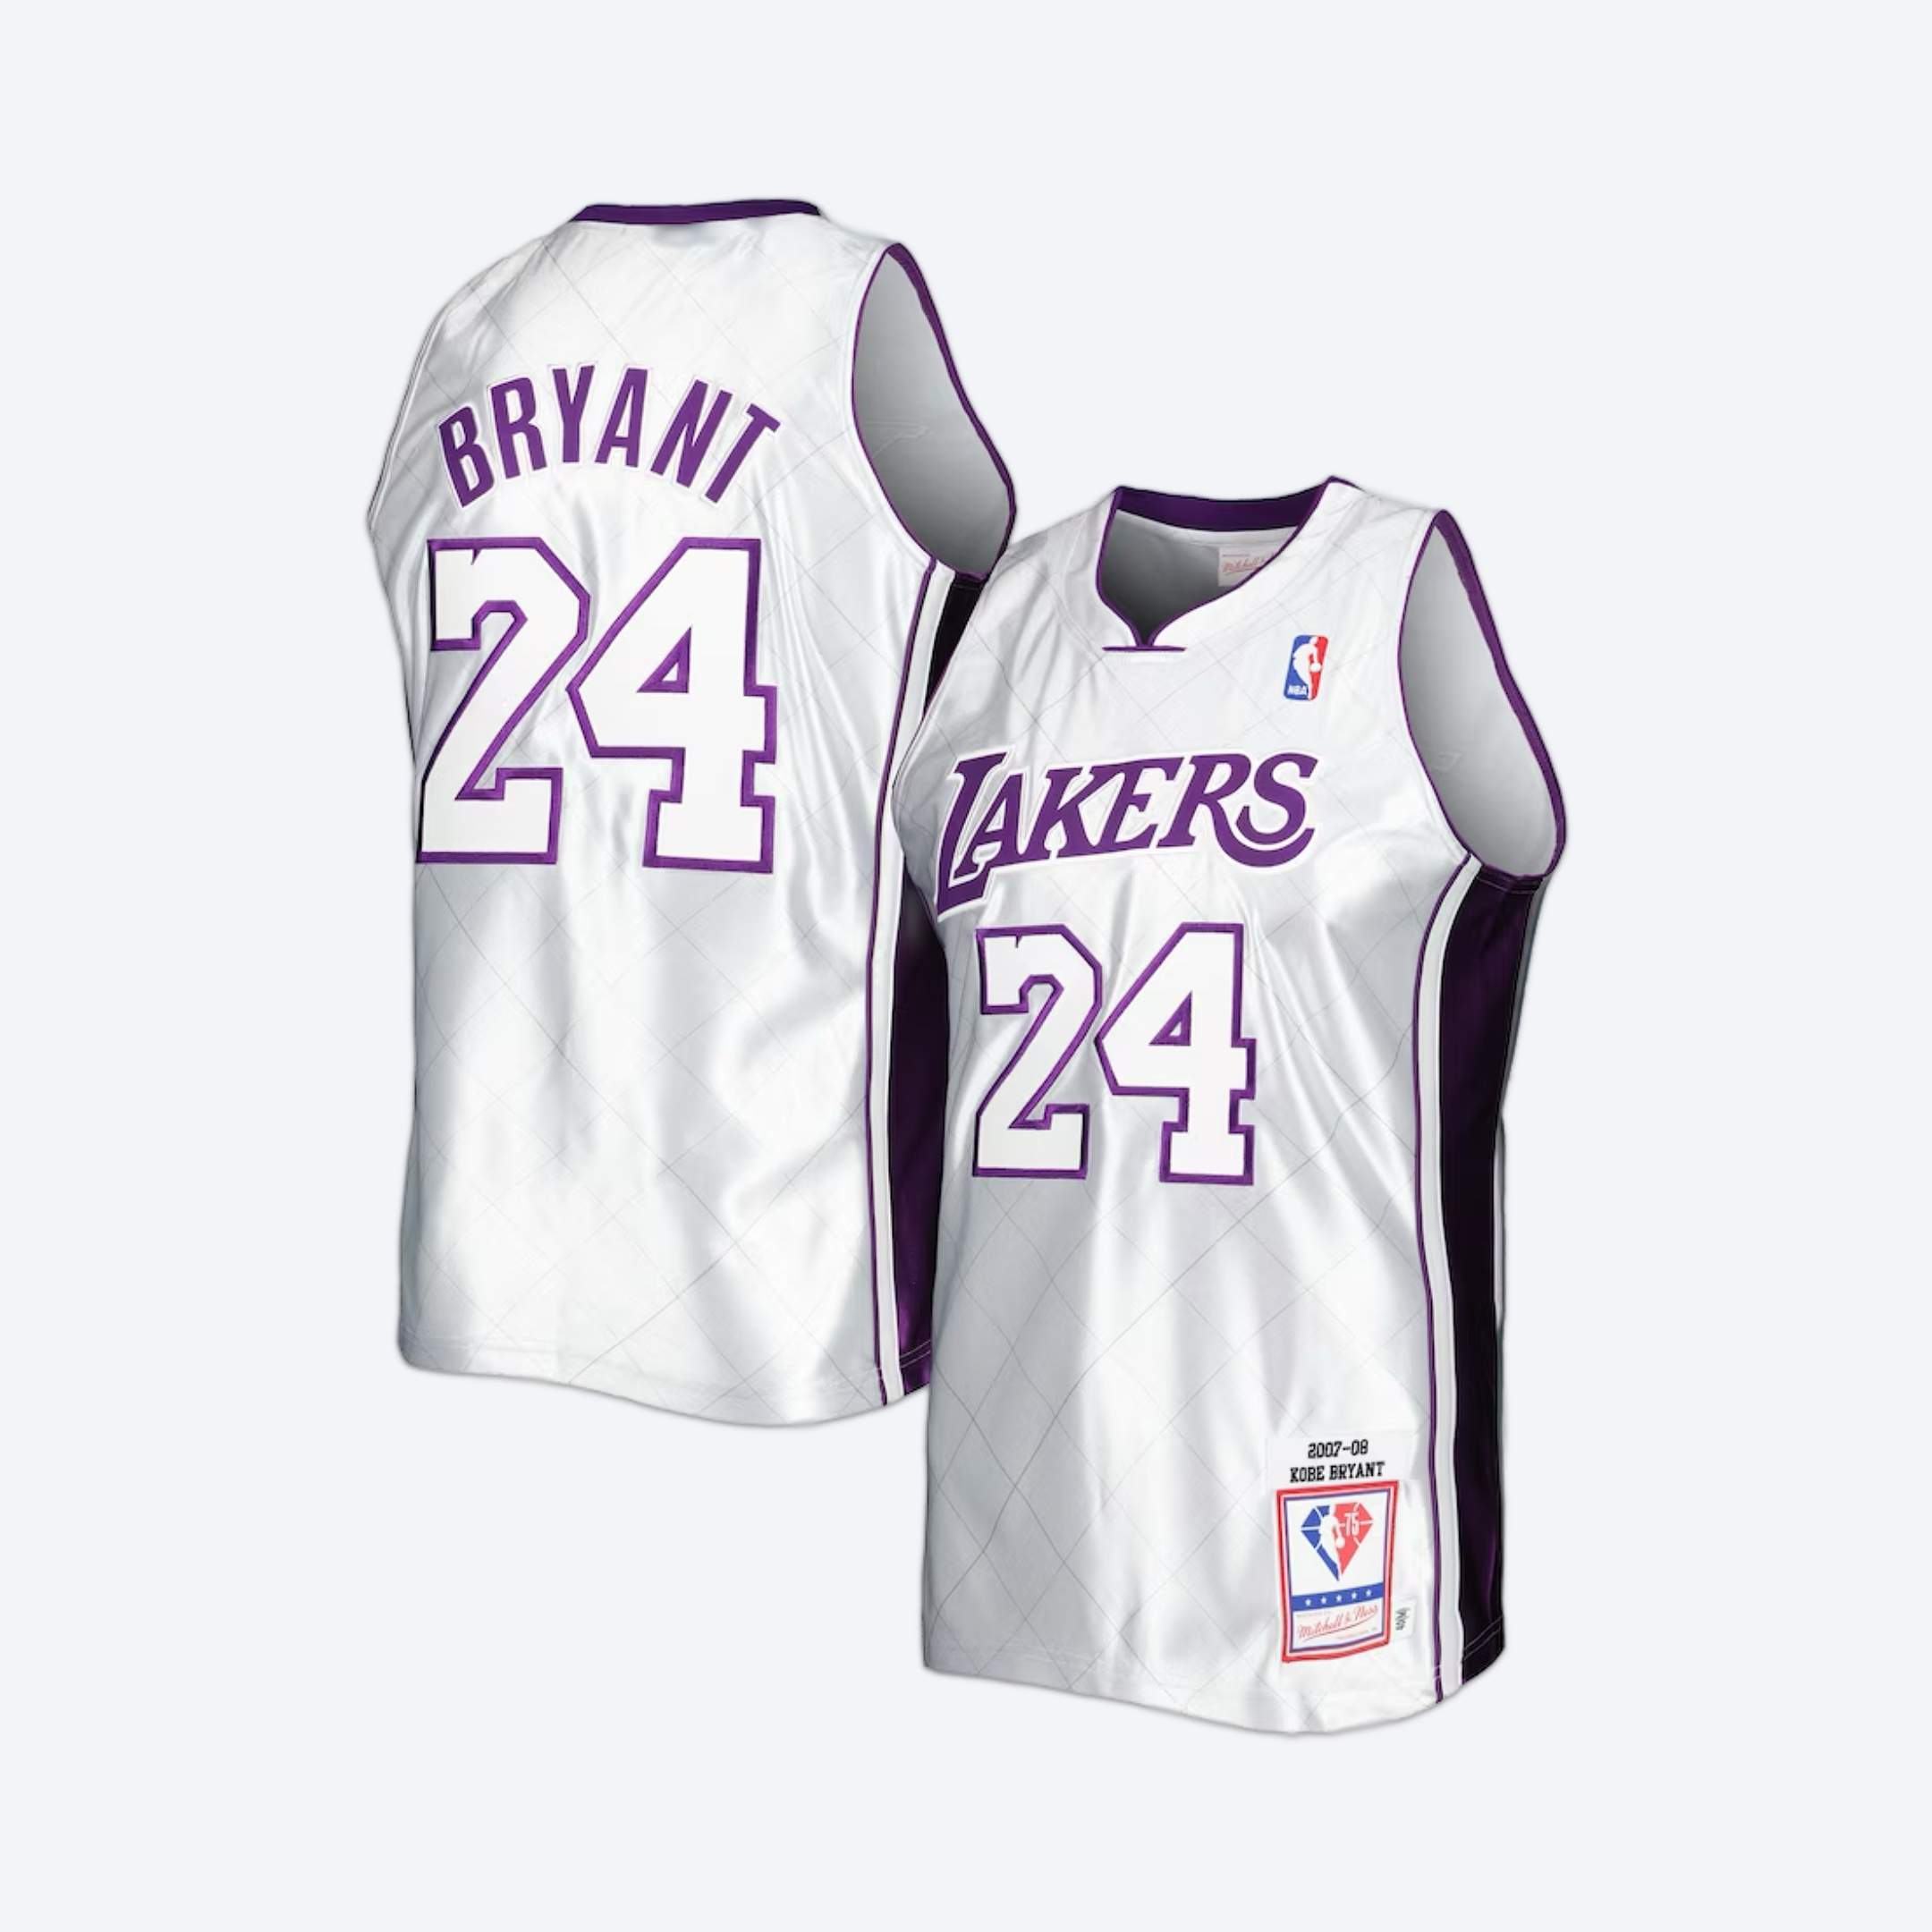 Kobe platinum 75th jersey front and back